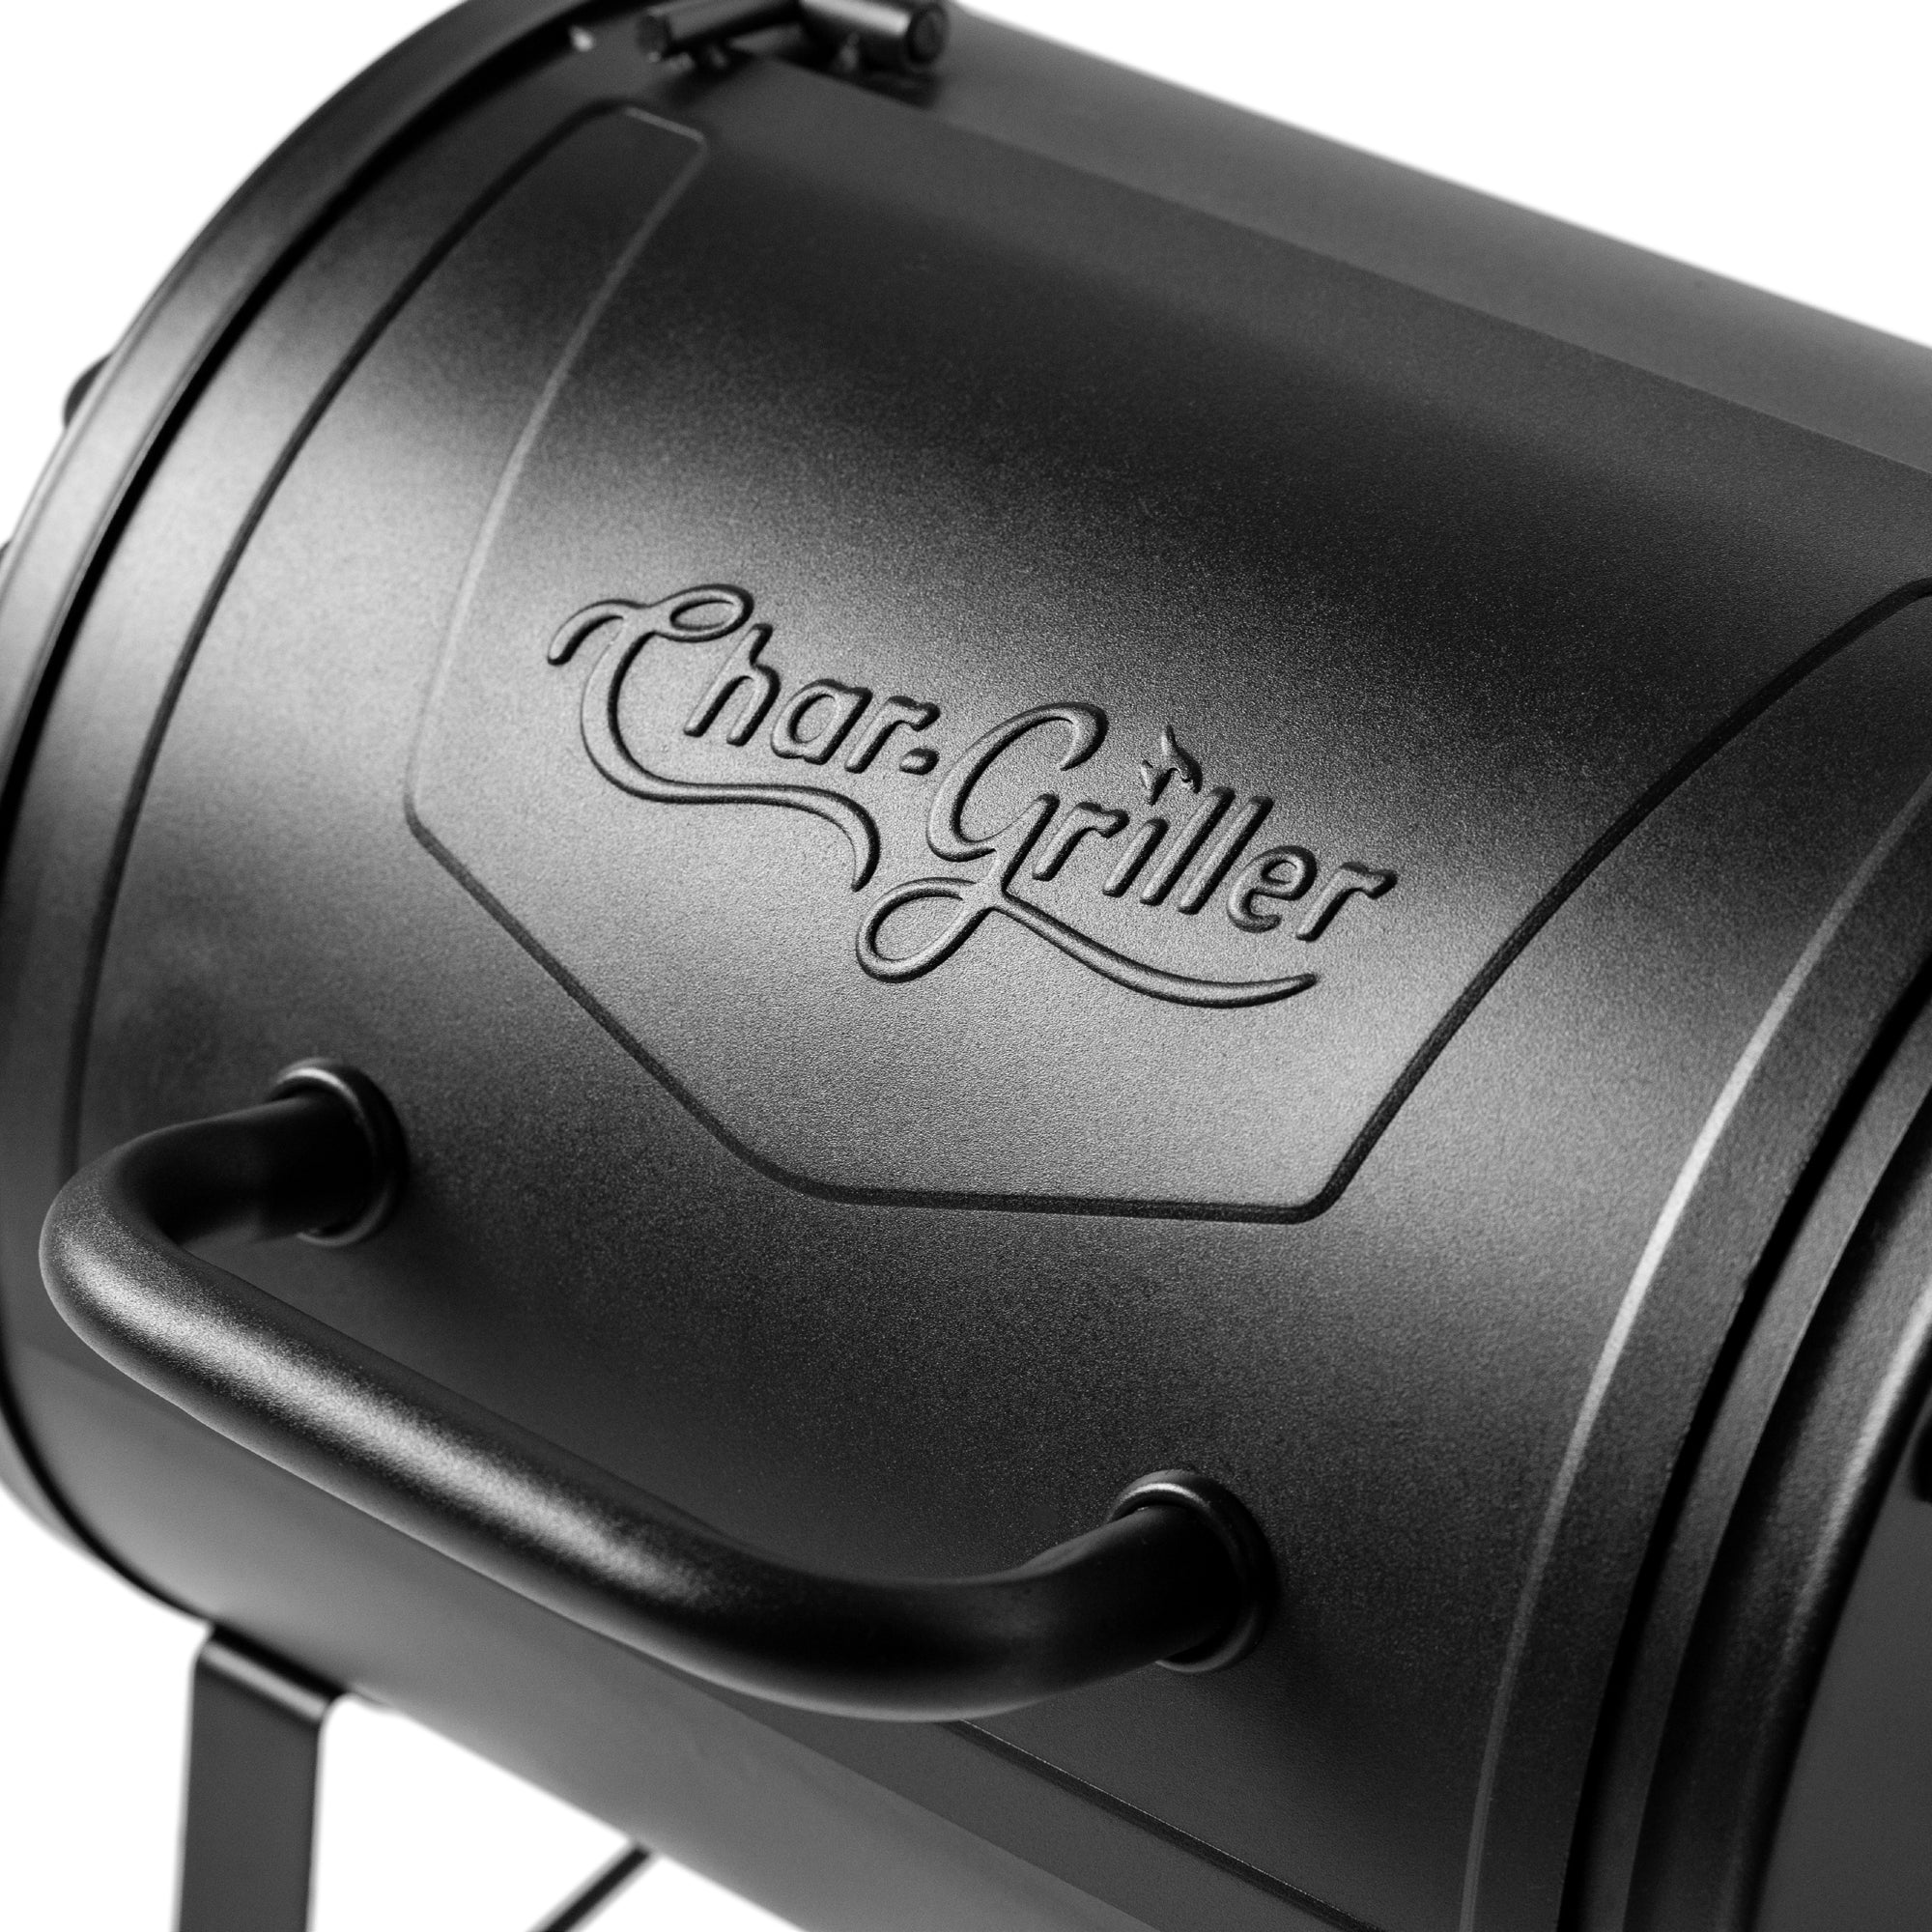 Char-Griller Portable Charcoal Grill and Side Fire Box